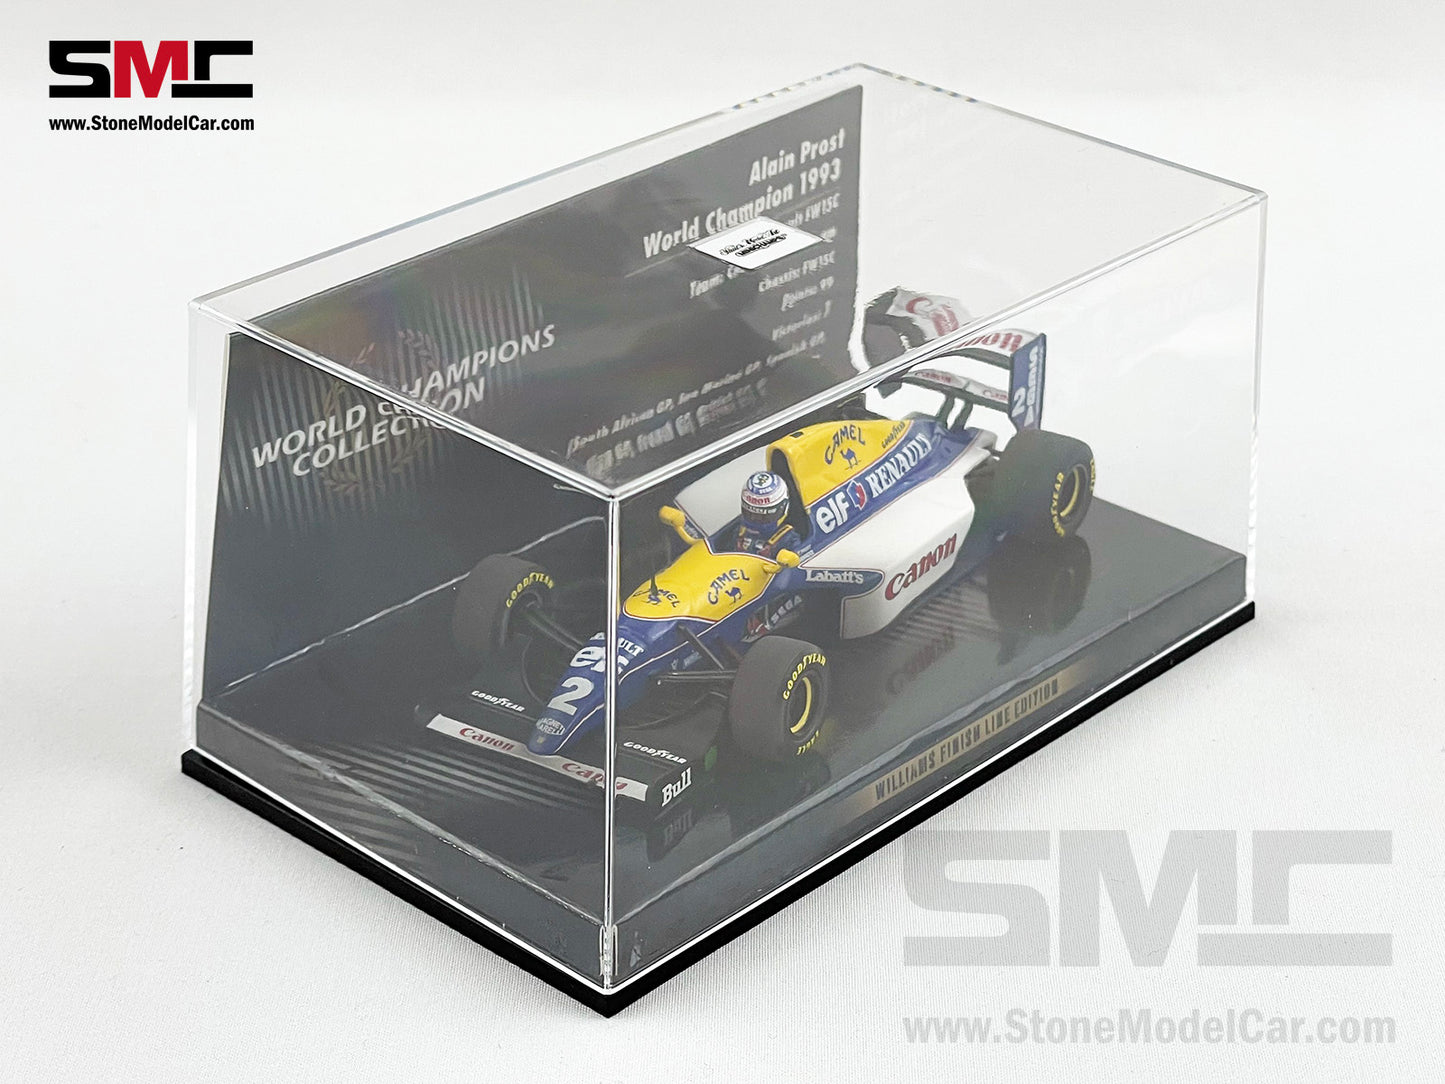 Williams F1 FW15C #2 Alain Prost 1993 World Champion 1:43 MINICHAMPS with CAMEL Decal